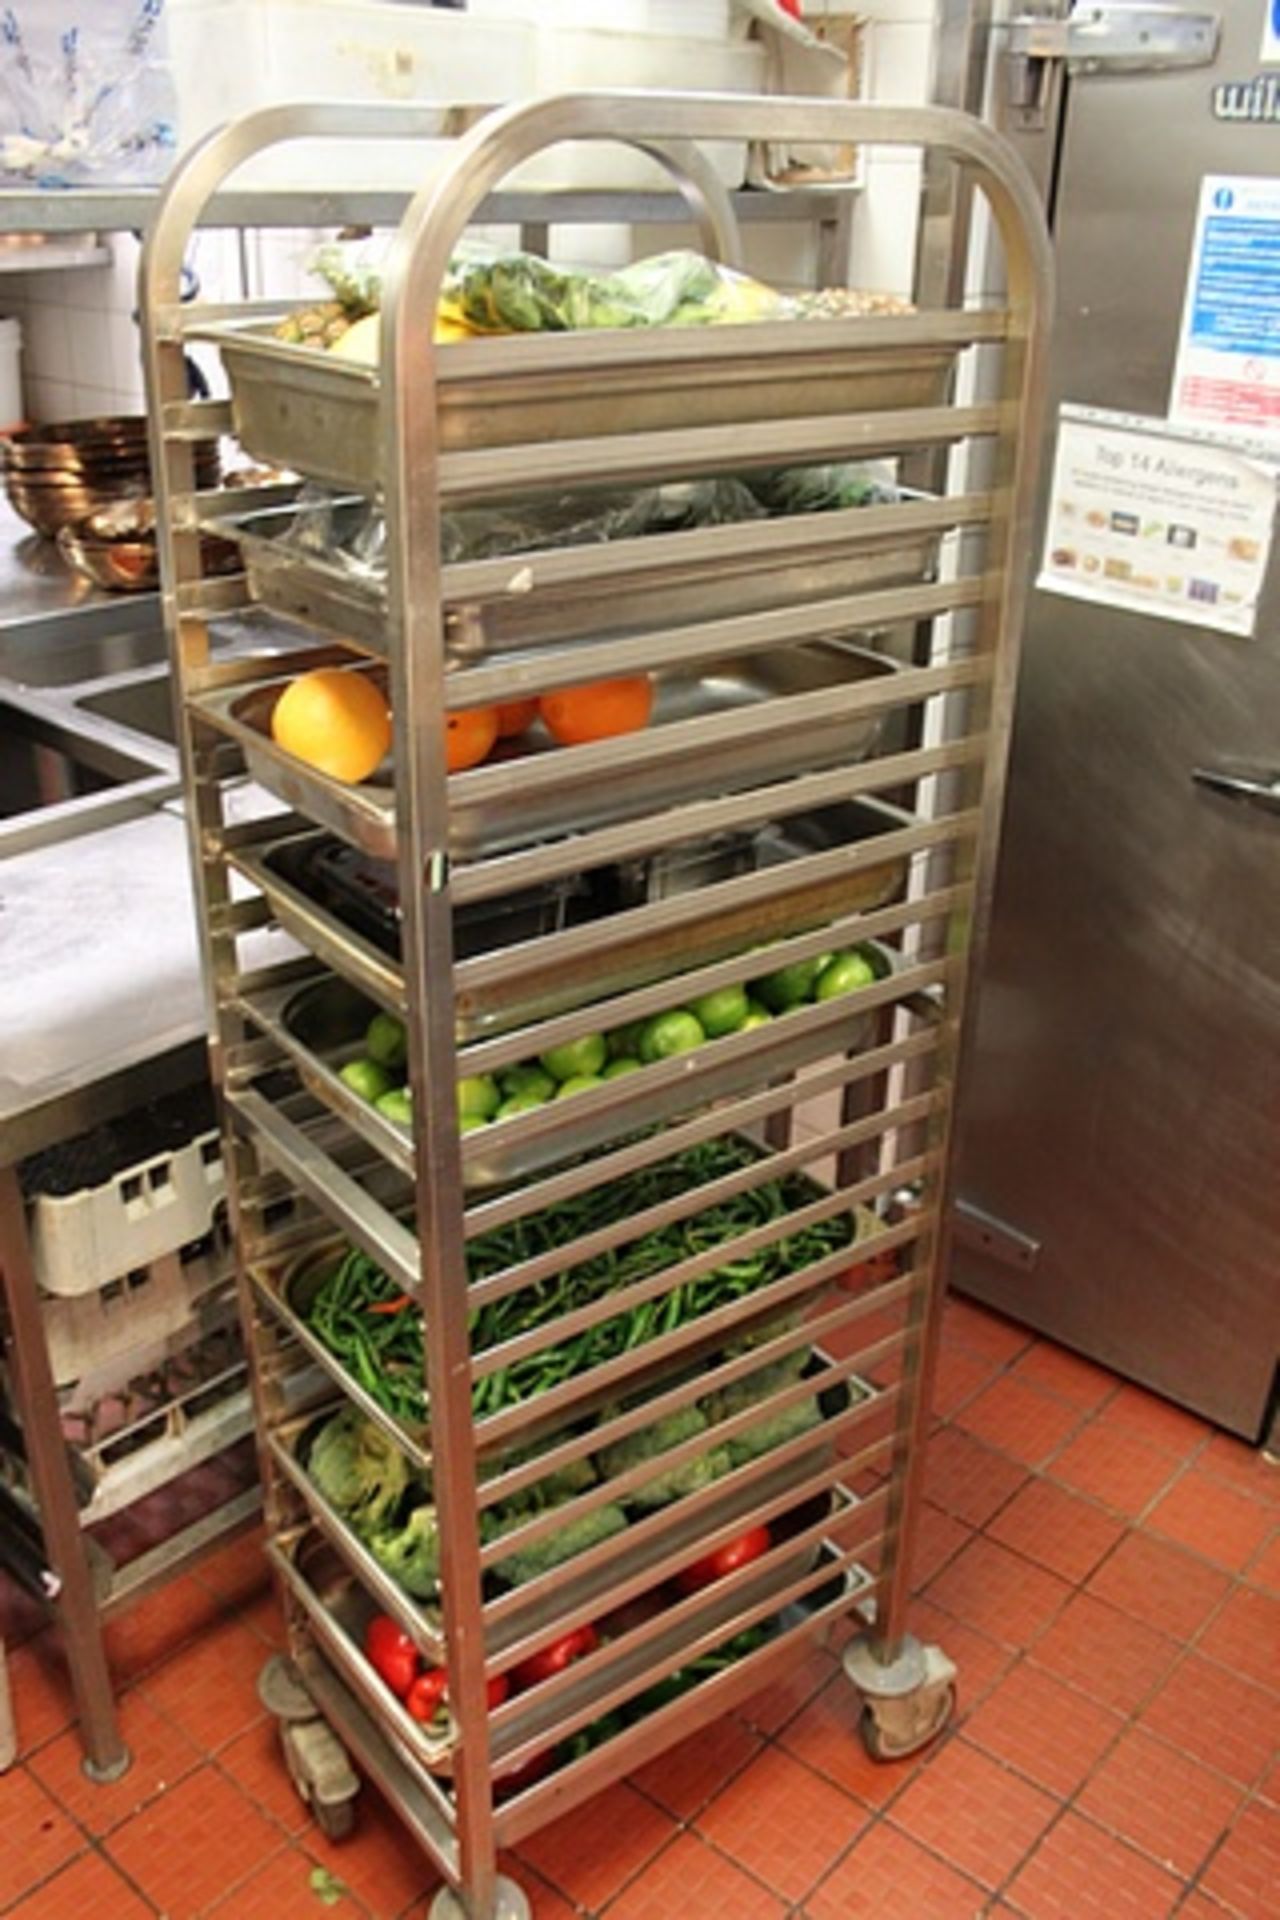 Gastronorm Trolley stainless steel mobile 20 Tier 1 1GN 320mm x 600mm x 1730mm